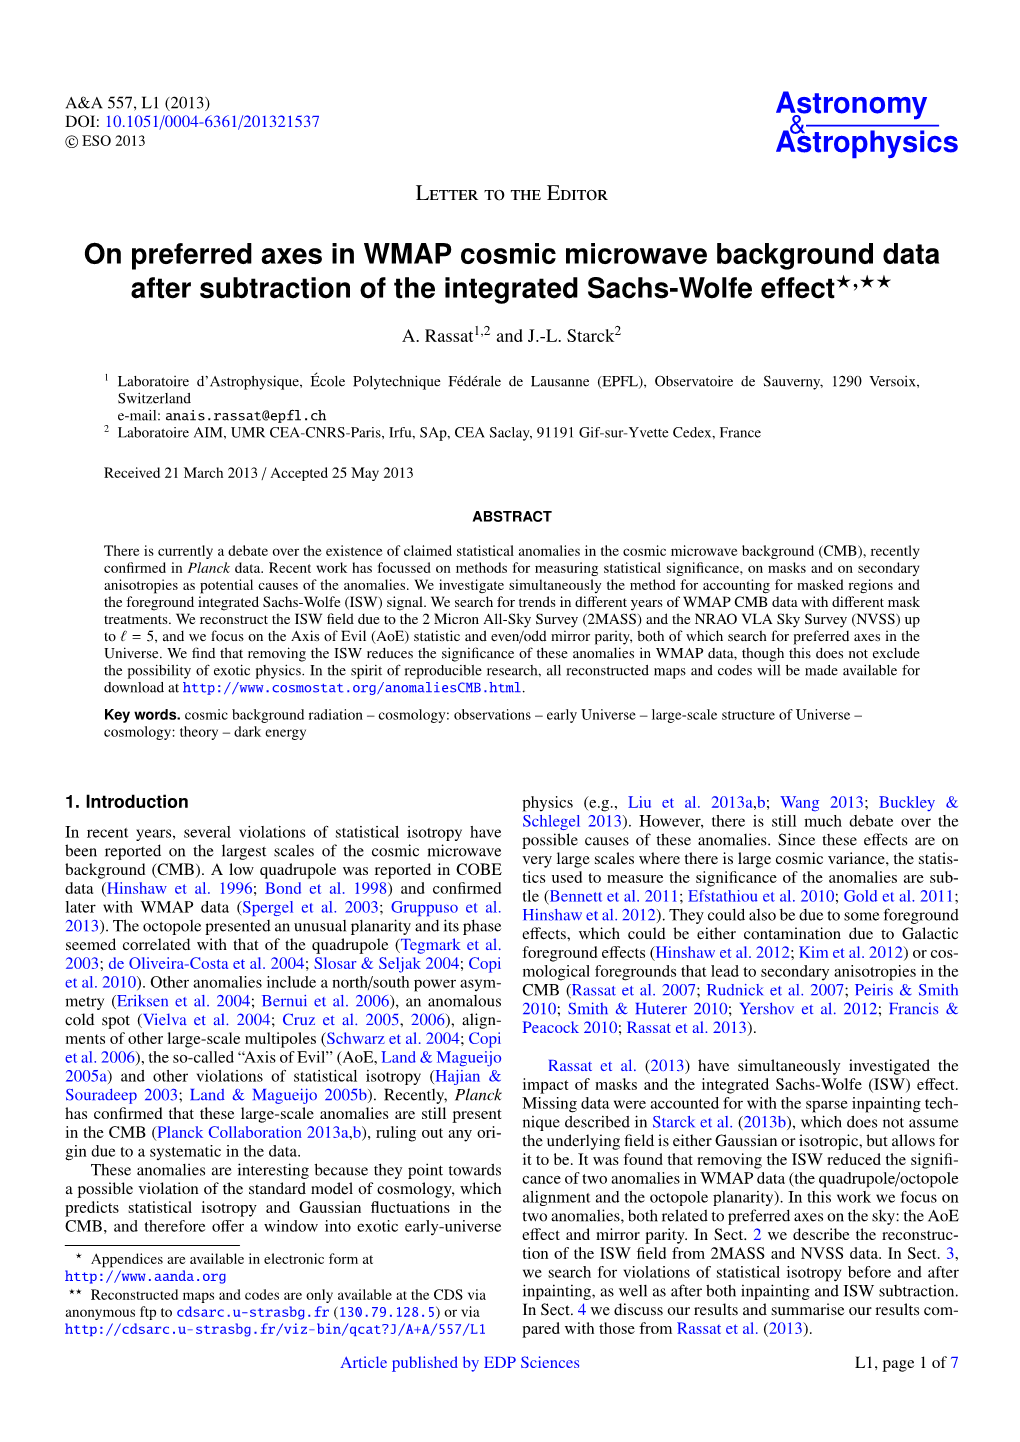 On Preferred Axes in WMAP Cosmic Microwave Background Data After Subtraction of the Integrated Sachs-Wolfe Effect?,??